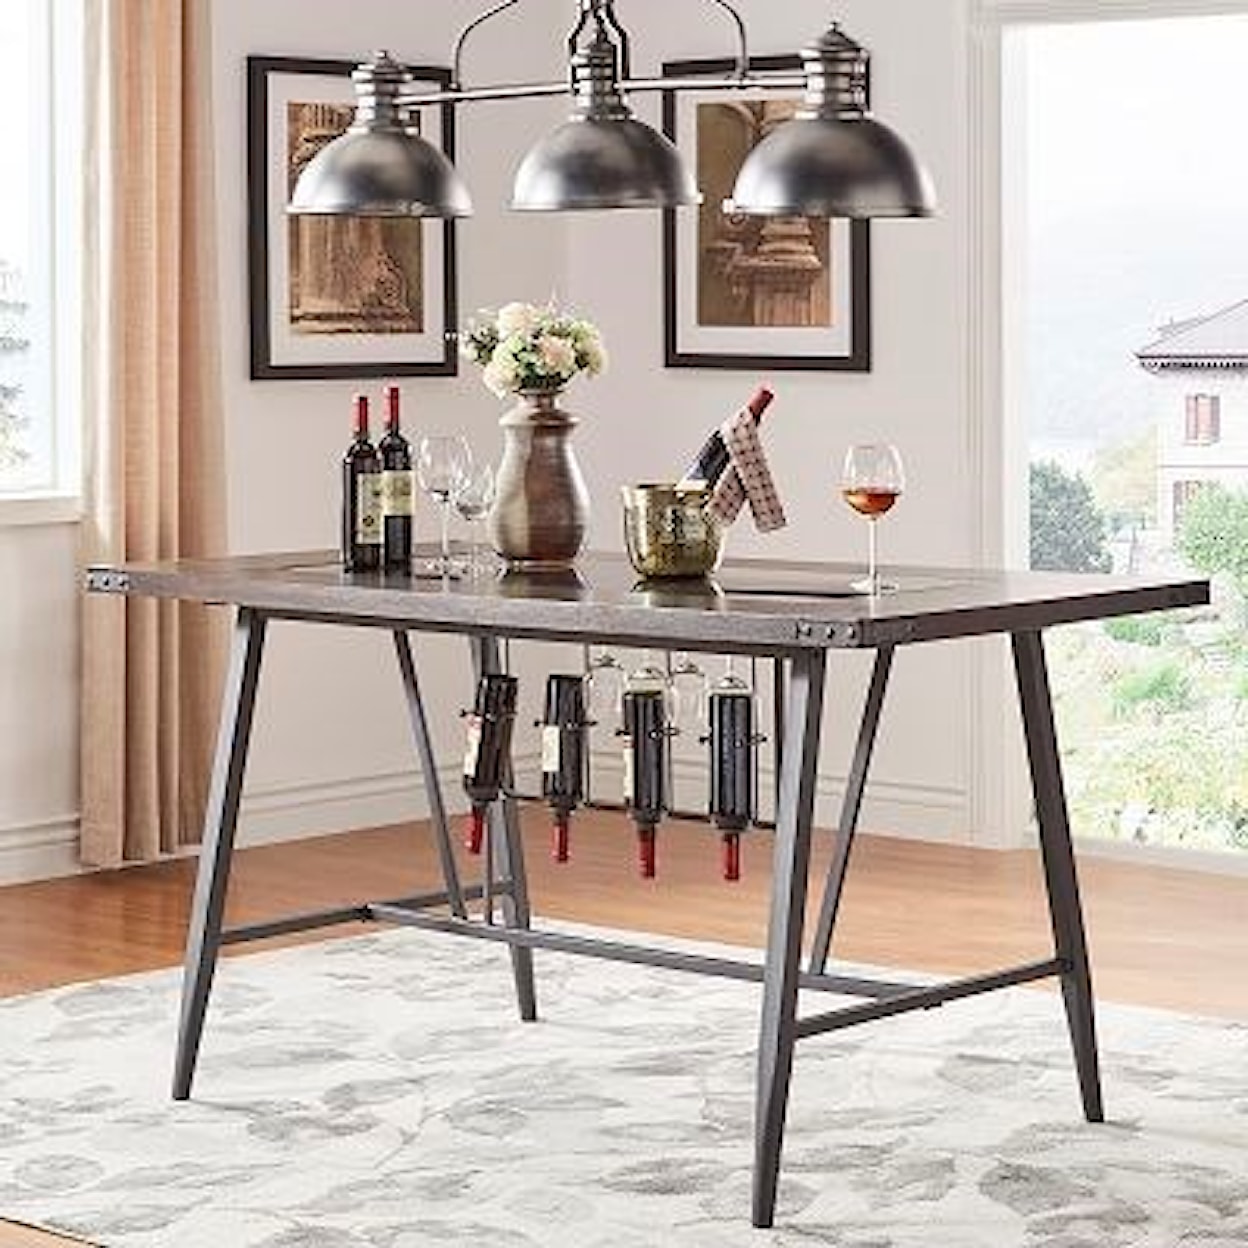 Homelegance 5566 Counter Height Table